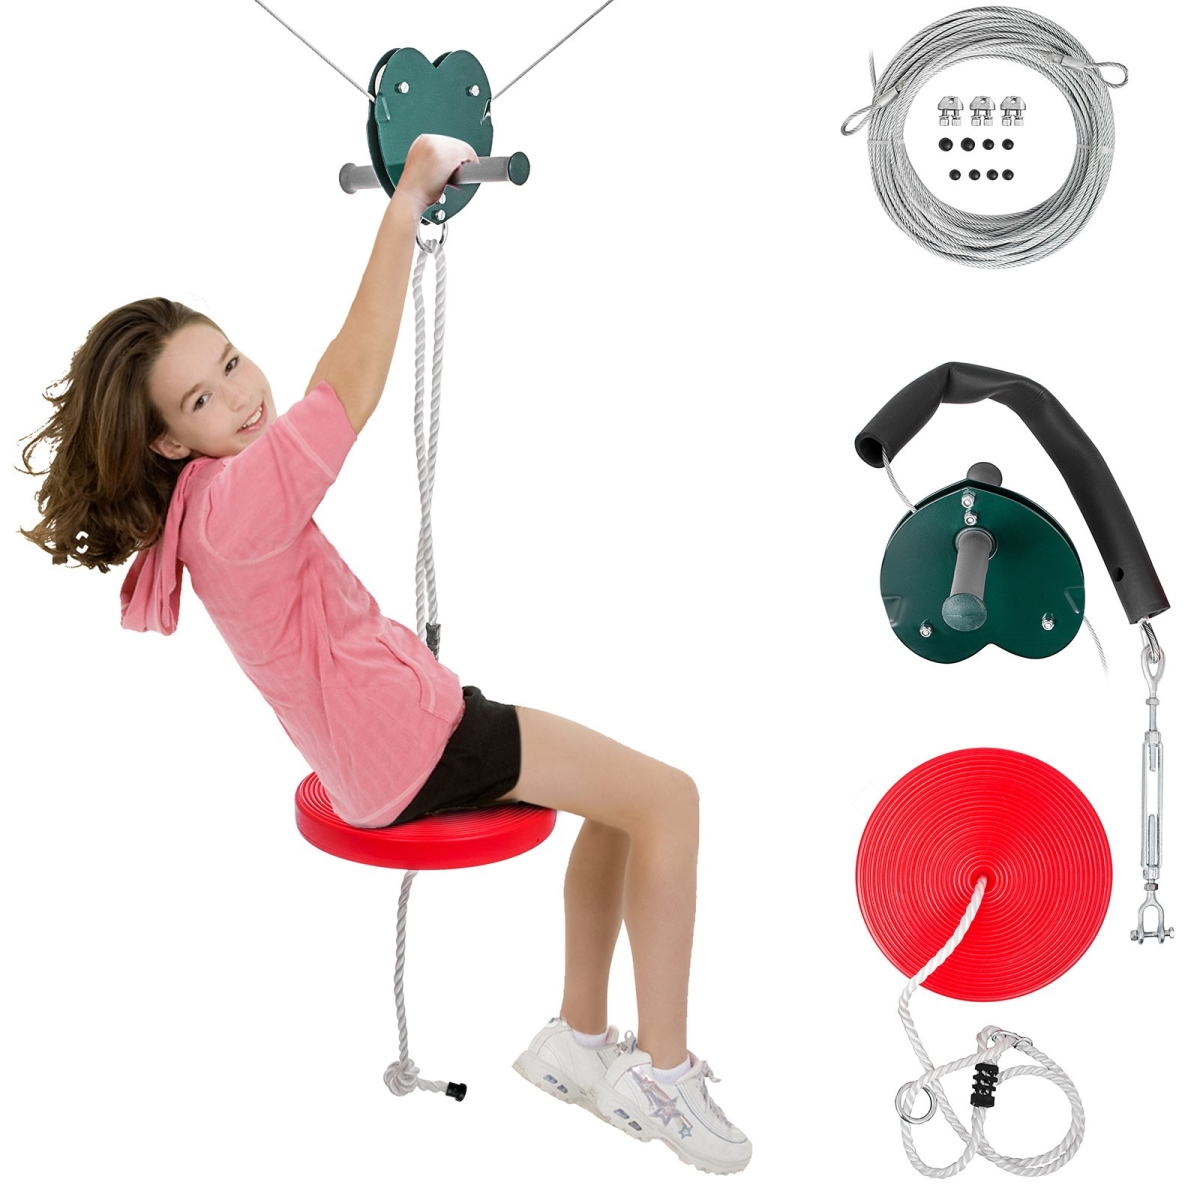 Picture of Vevor YDSLS100FTRED0001V0 100 ft. Stainless Steel Ultimate Zip Line Kit Toys with Seat Trolley